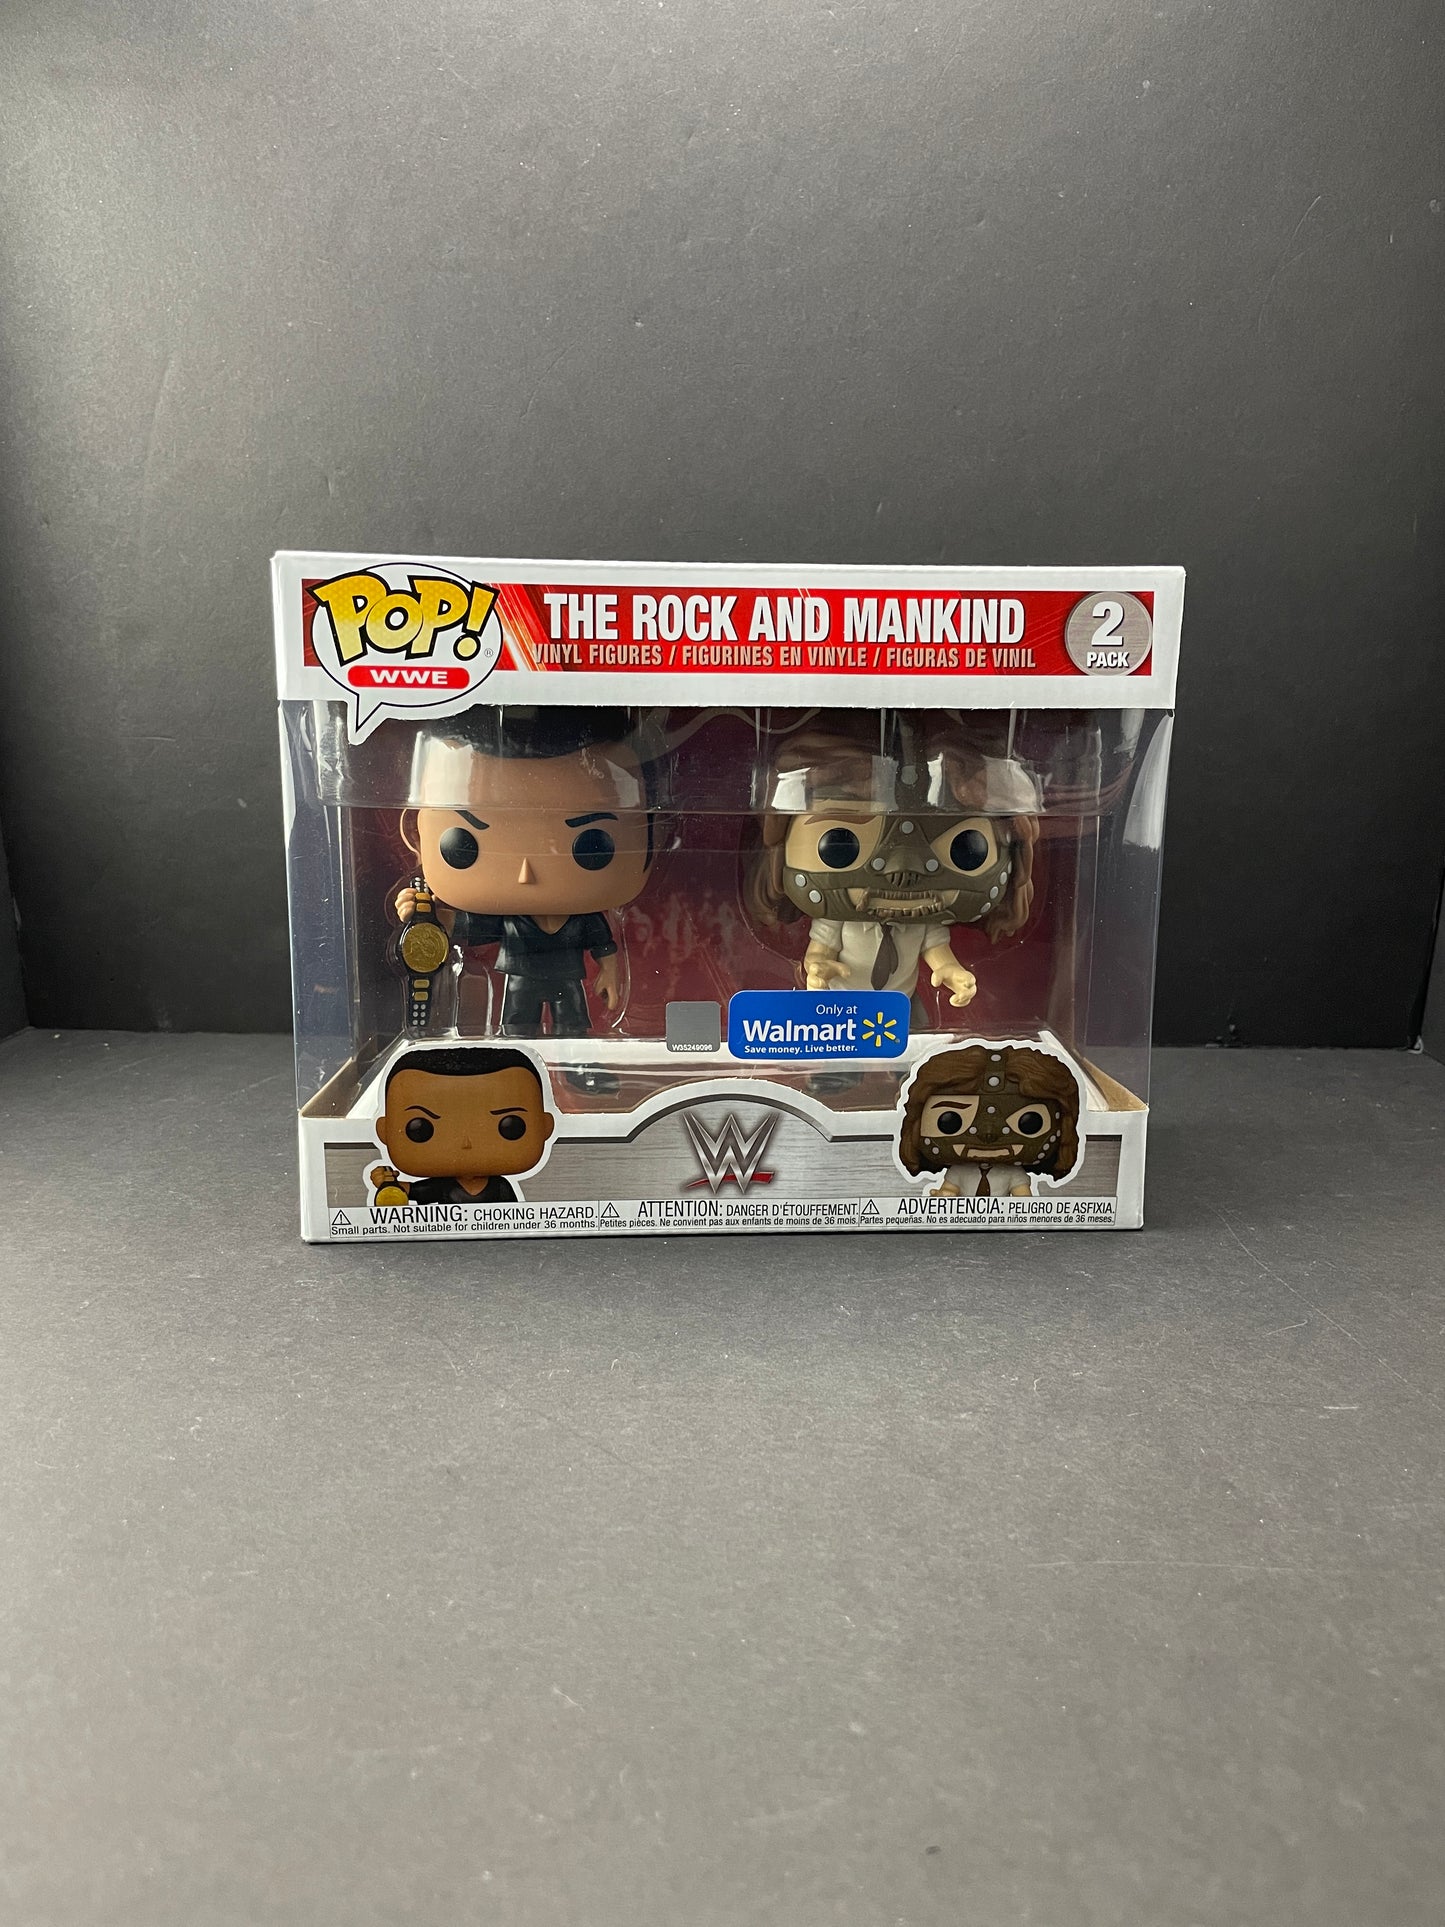 The Rock and Mankind 2 Pack